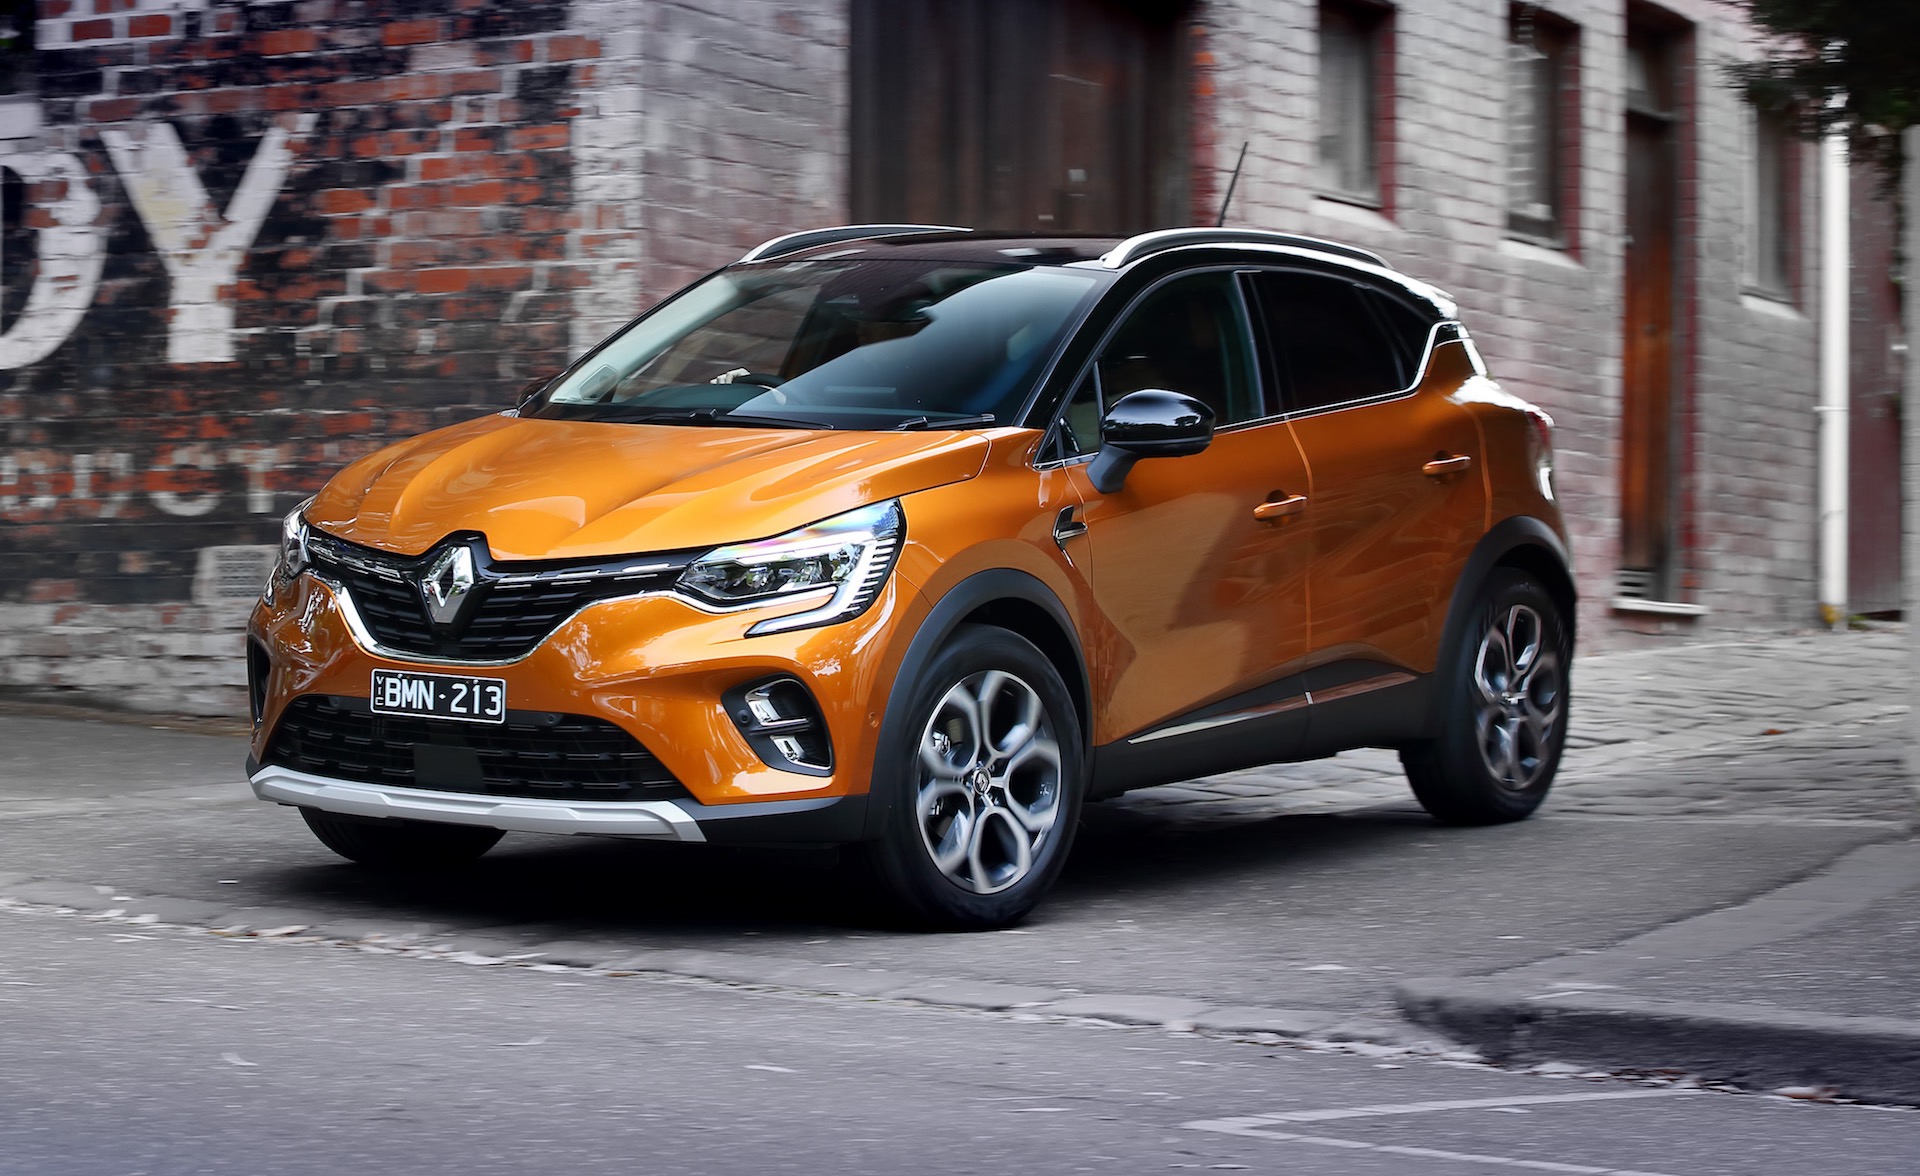 2021 Renault Captur on sale in Australia from $28,190